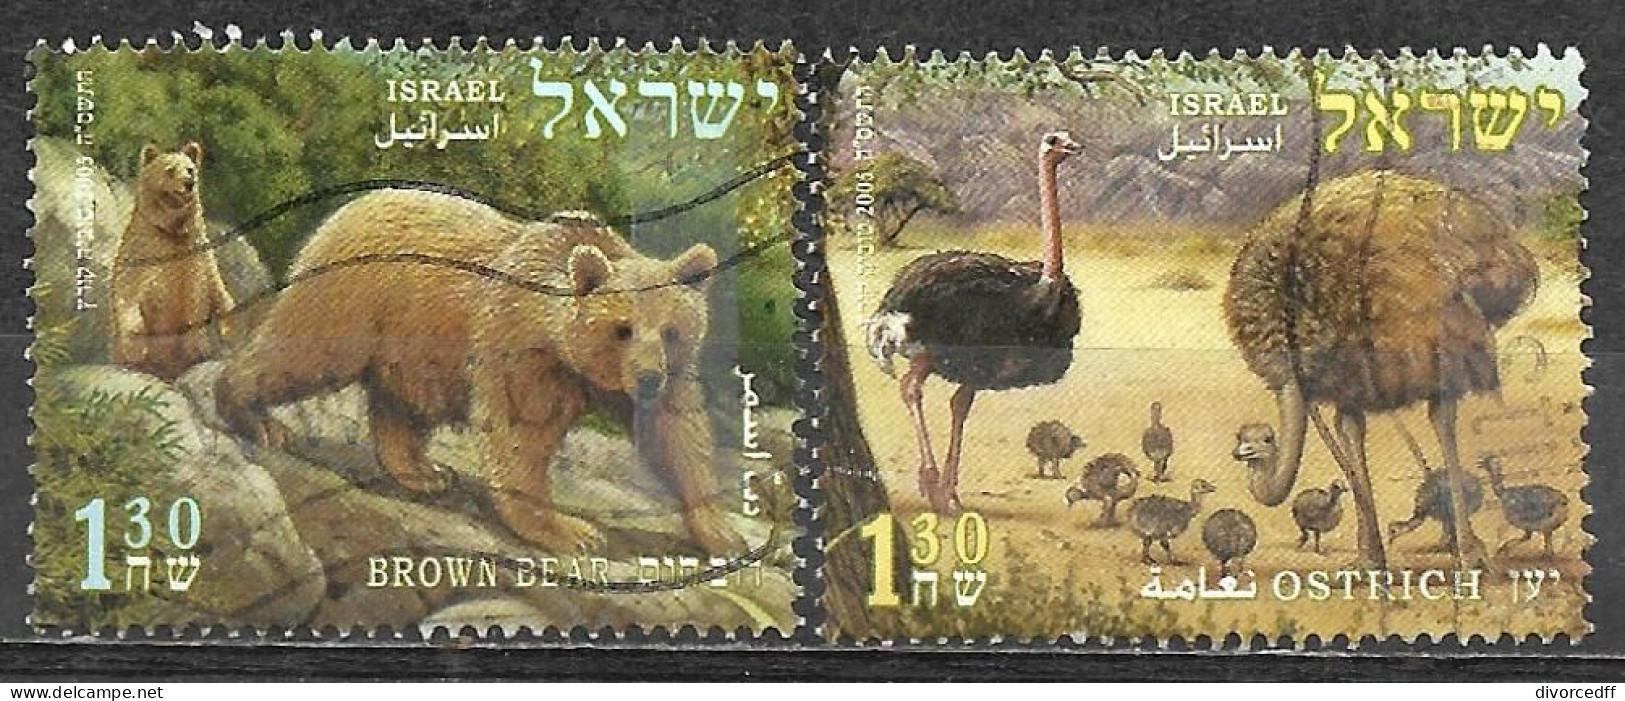 Israel 2005 Used Stamps Animals From The Bible Bear Ostrich [INLT19] - Usados (sin Tab)